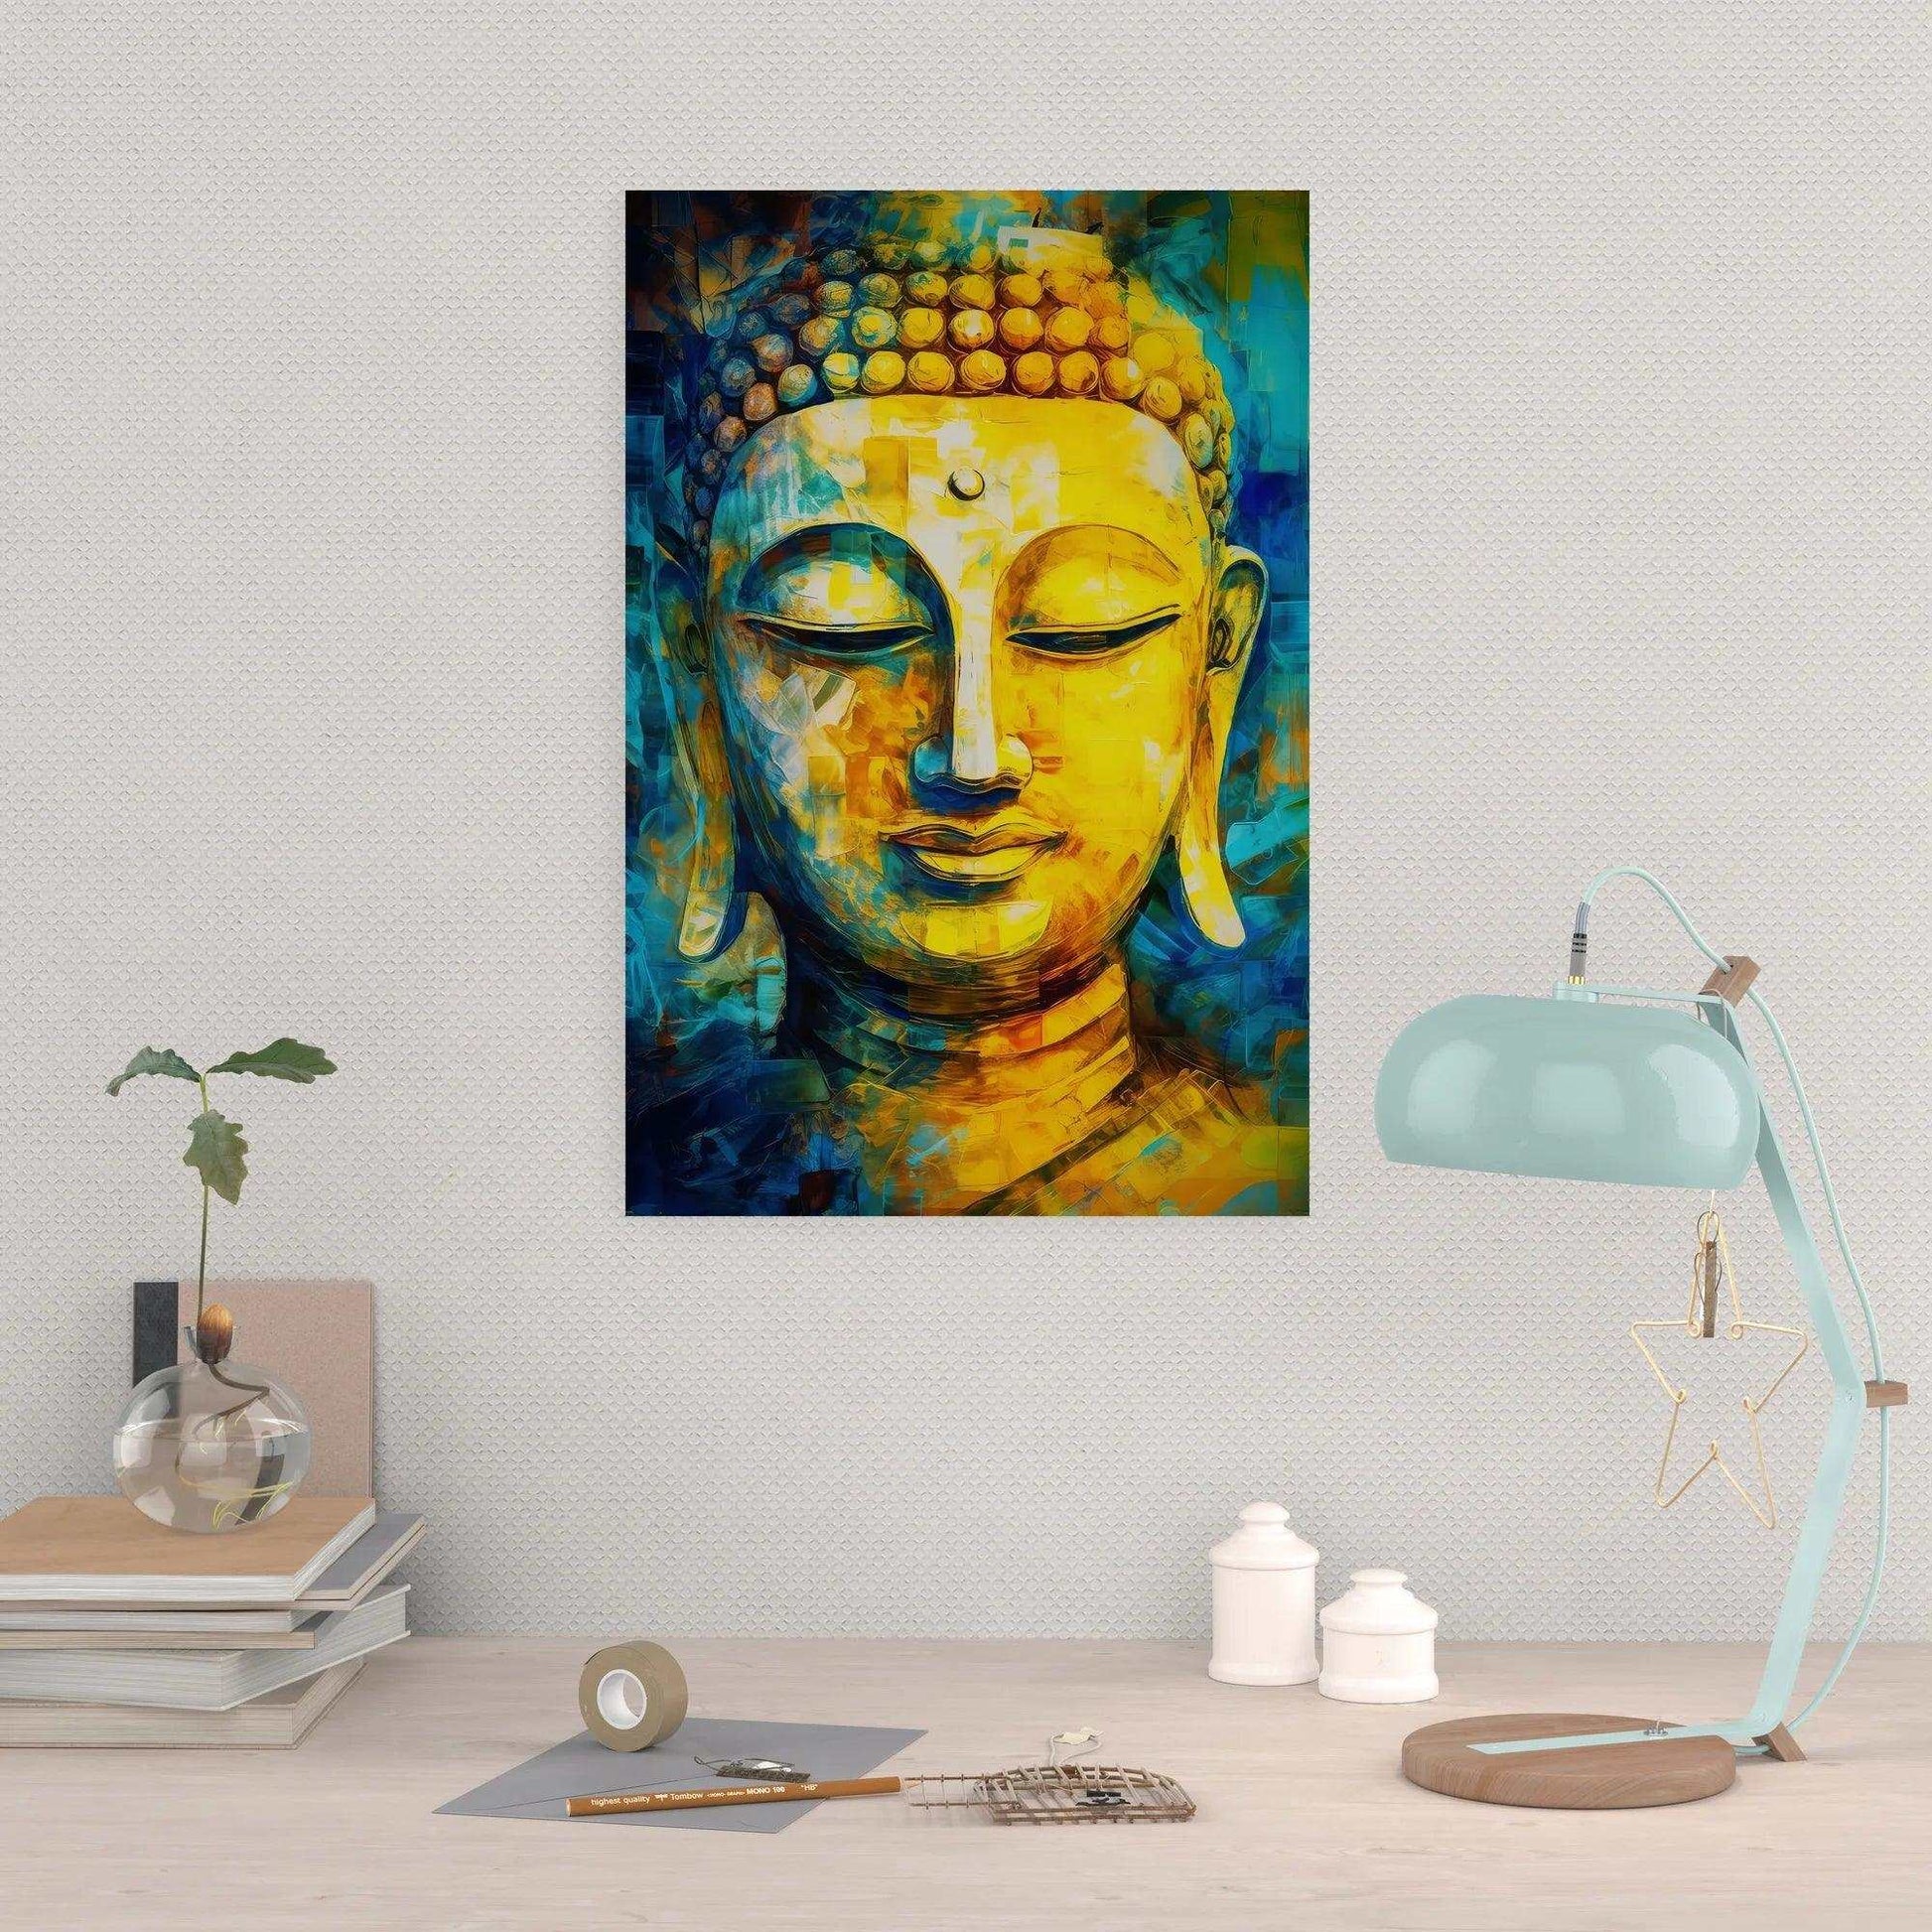 A vibrant Buddha painting with golden and blue tones hangs on a white wall, complementing a modern workspace that includes a pastel blue desk lamp, a stack of books, and minimalist decor.